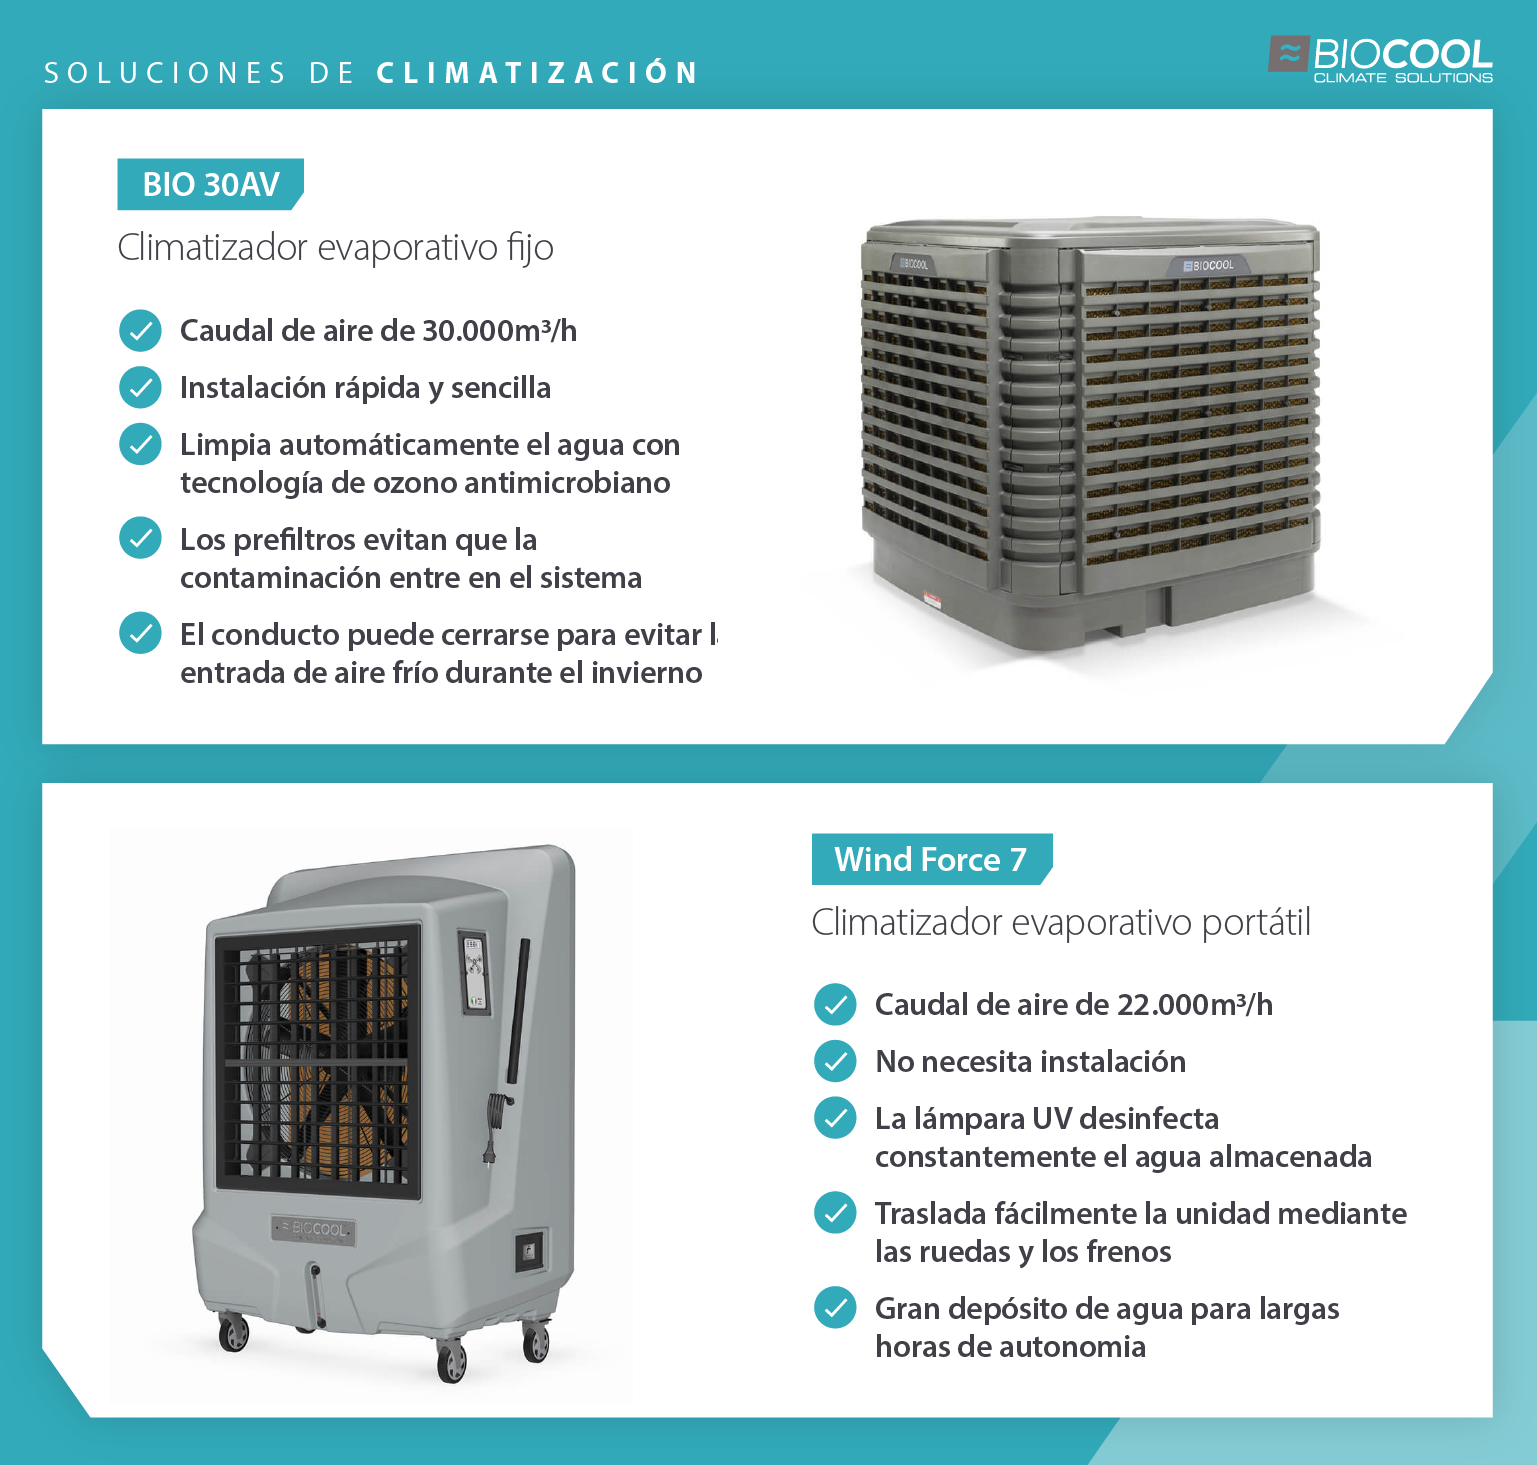 Product showcase comparing features of Biocool fixed and portable evaporate cooler units for warehouses